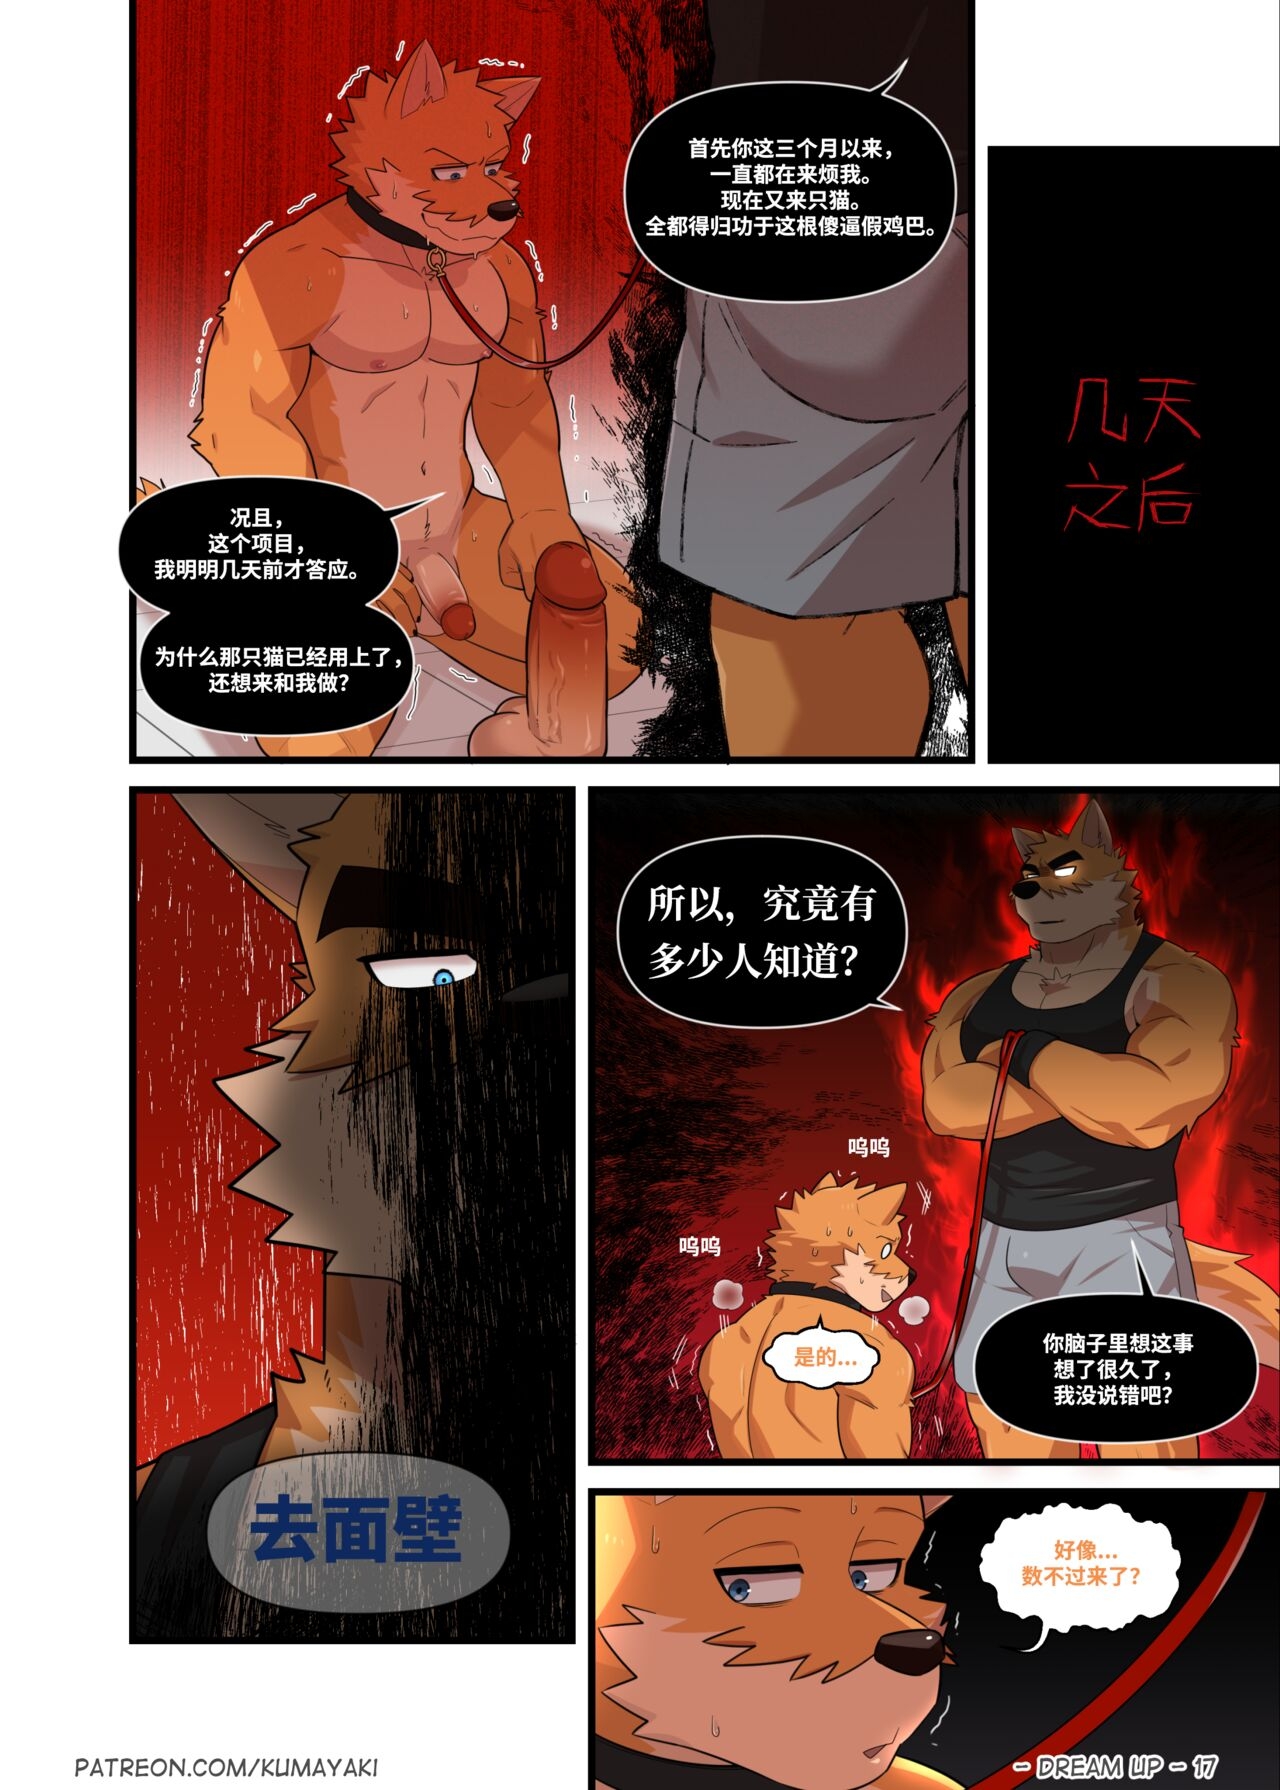 [Luwei] Dream Up {Uncensored} {HD} [狗大汉化] [Simplified Chinese] [Ongoing] 17